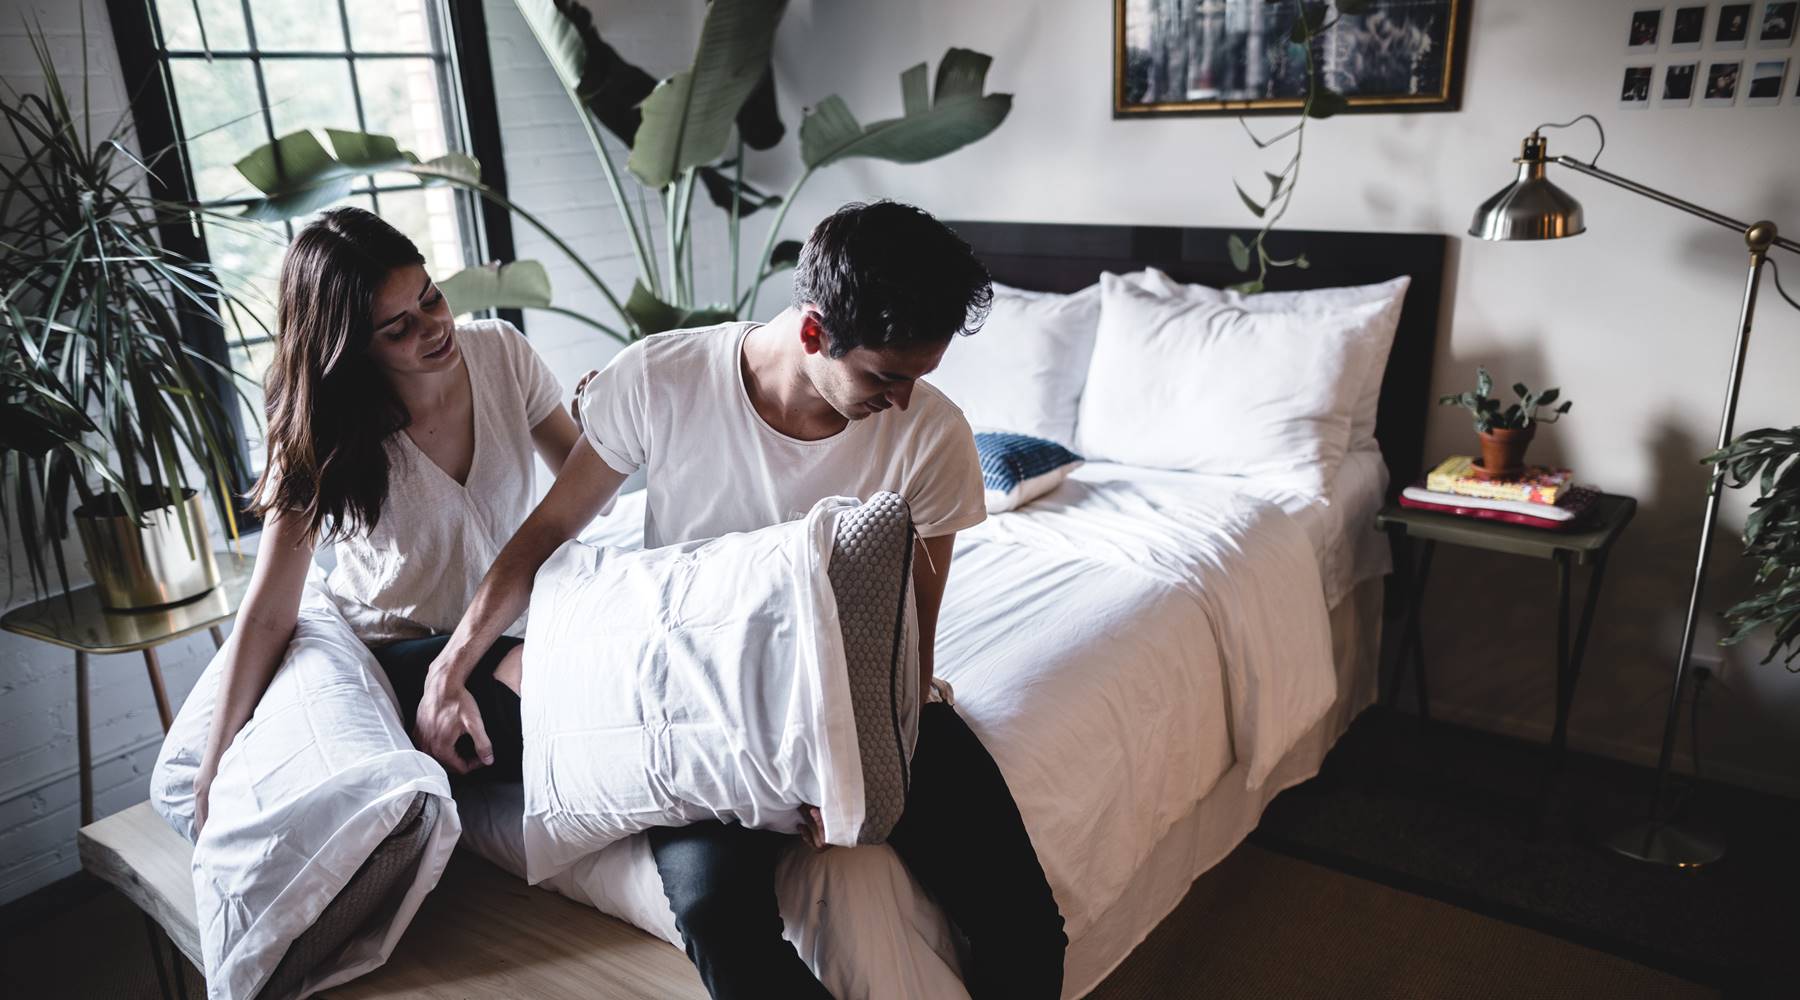 Man and Women in white t-shirts sitting on a bed holding pillows.